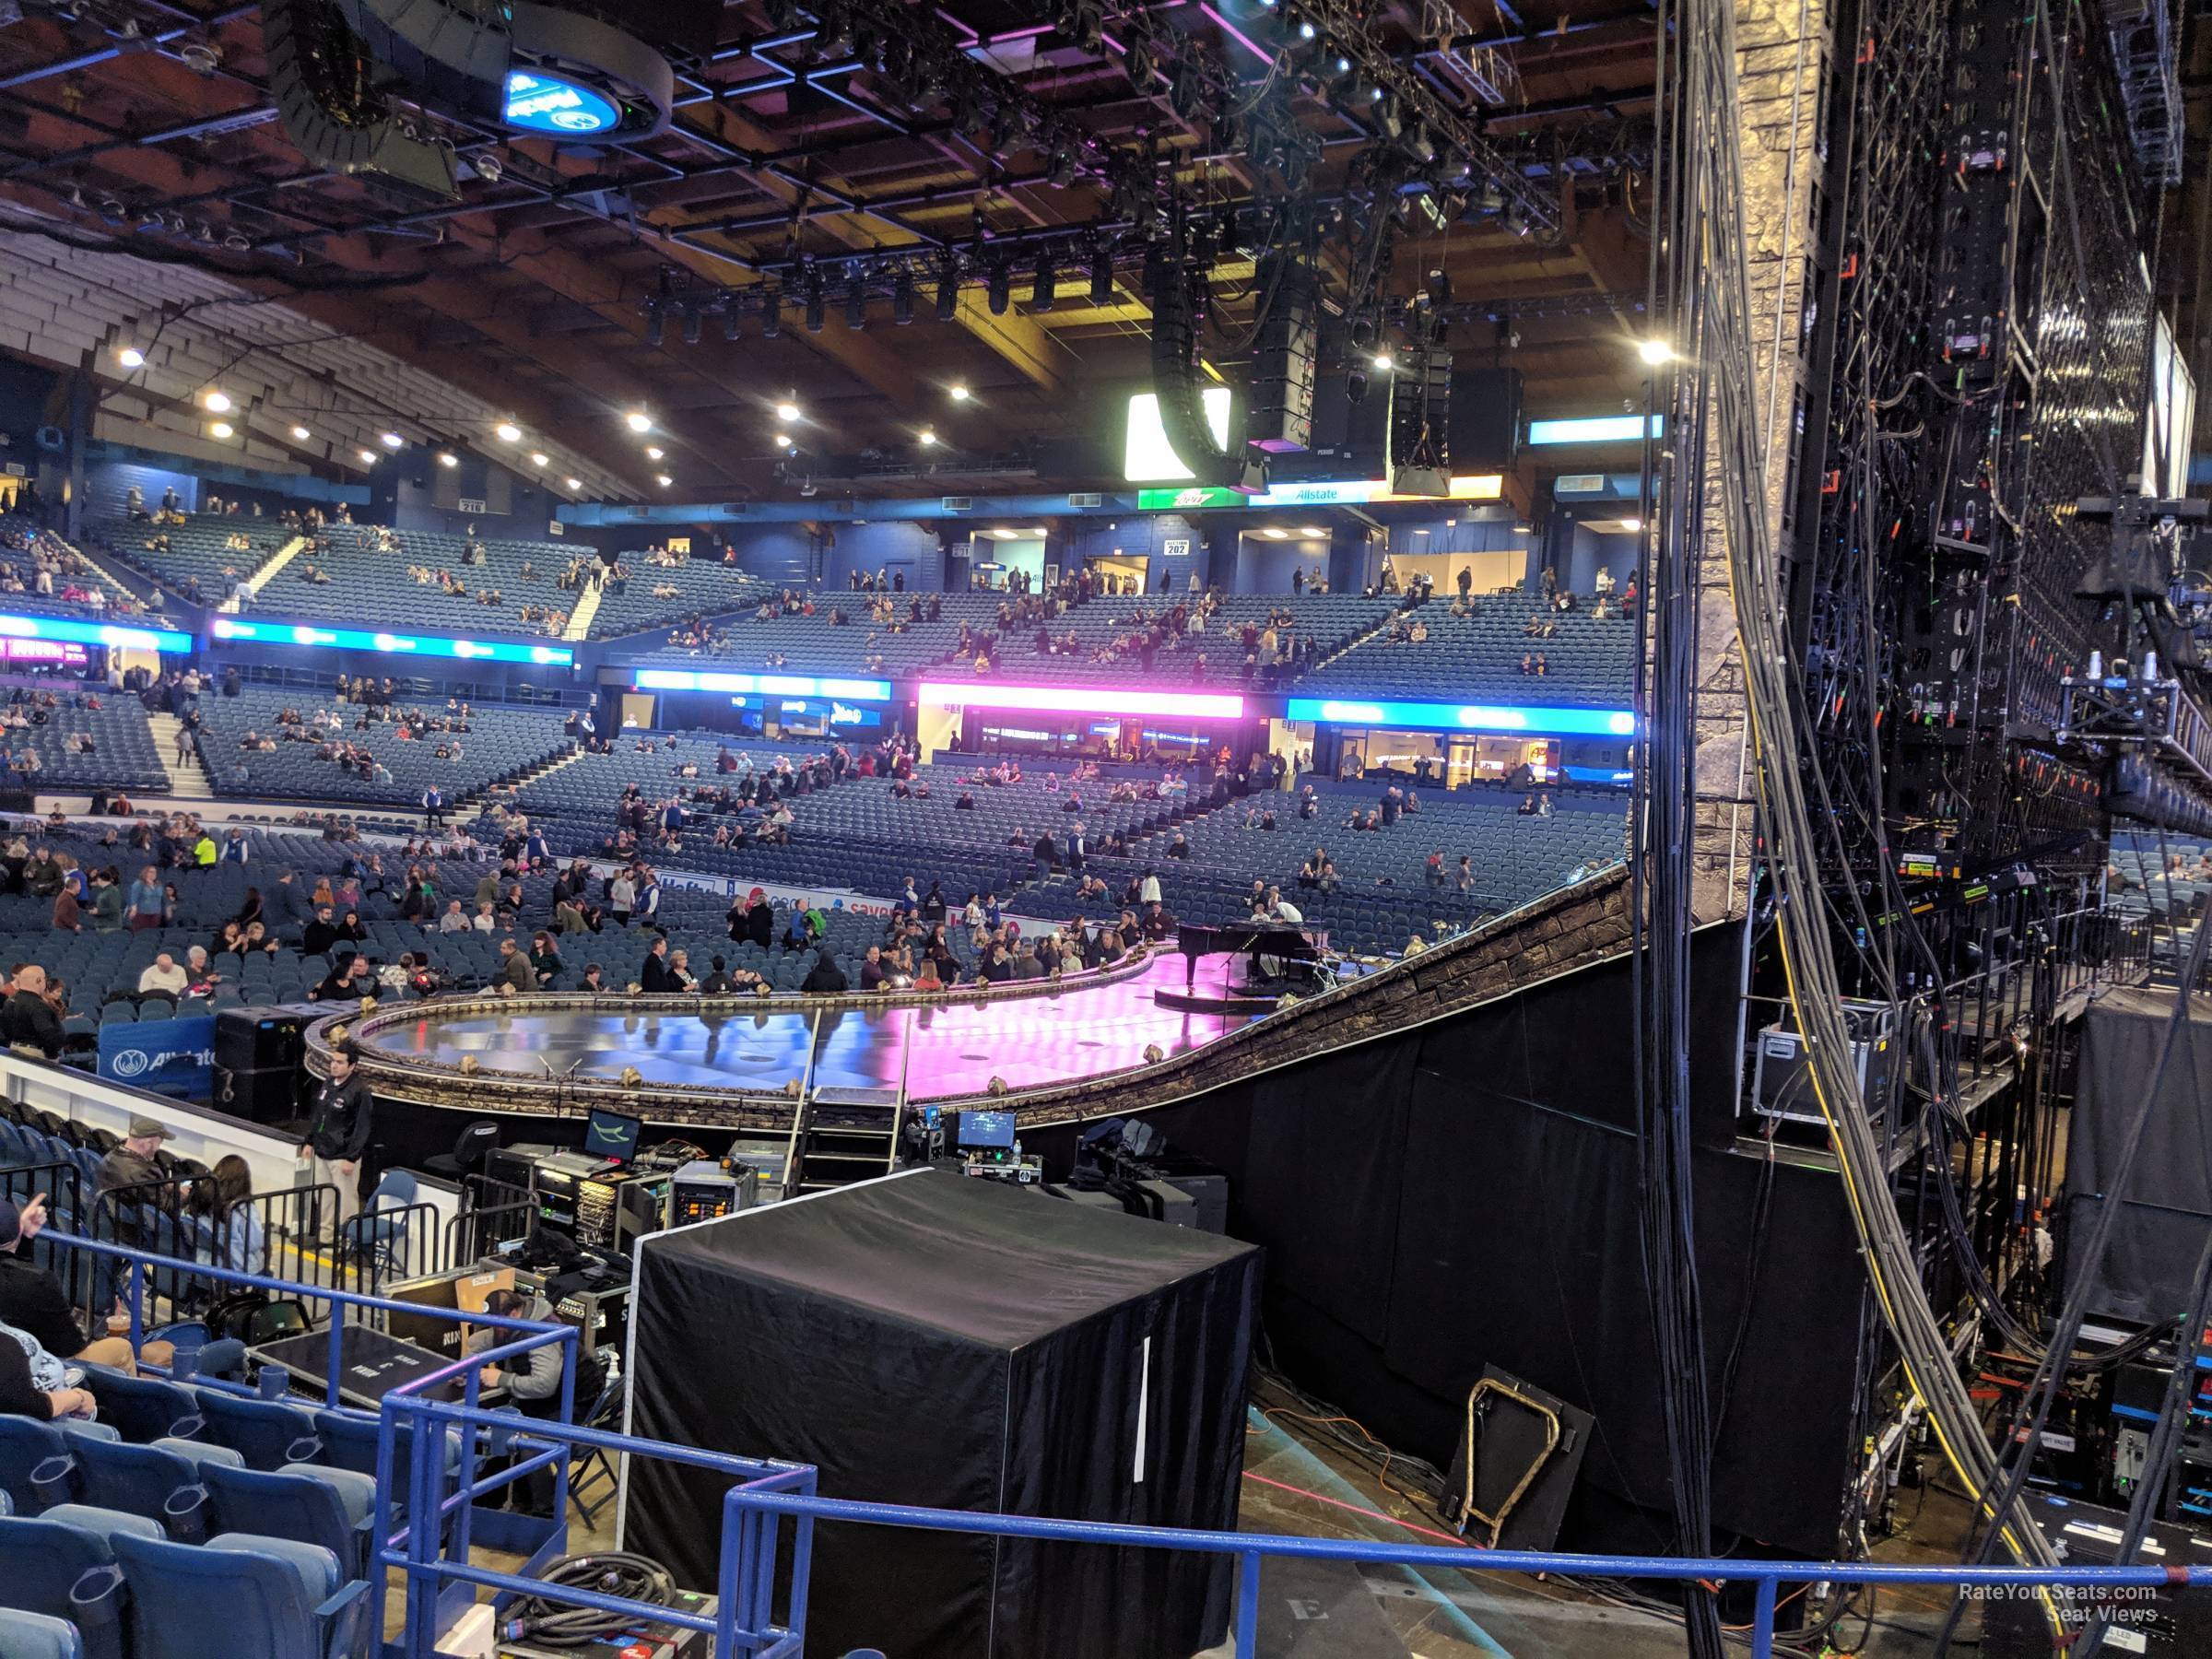 Section 108 at Allstate Arena